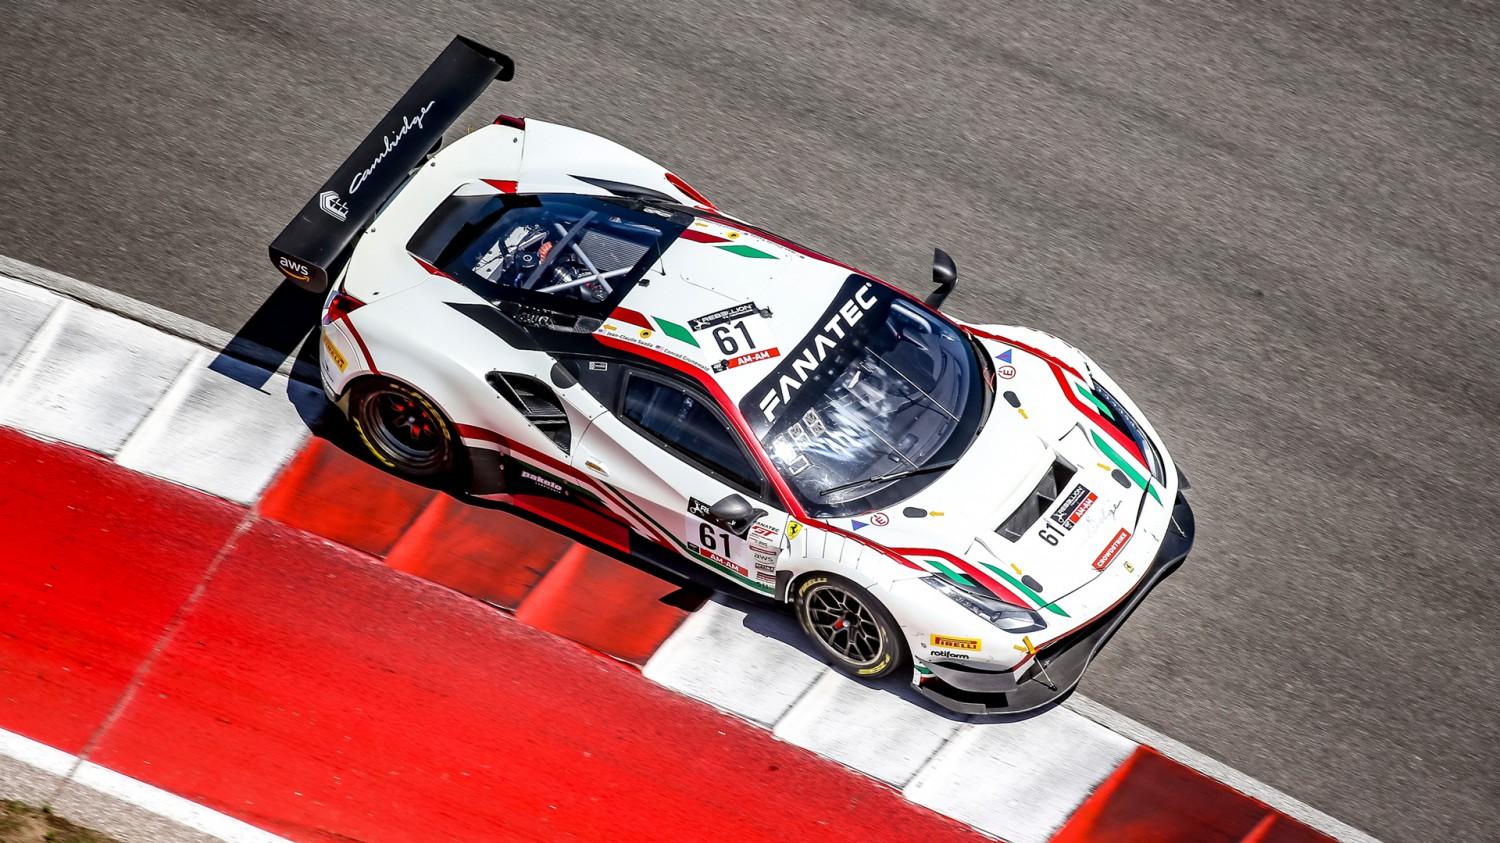 Preview of #61 AF Corse Cambridge 488 GT3 EVO From 2022 GTWC America by Kerim Havuz